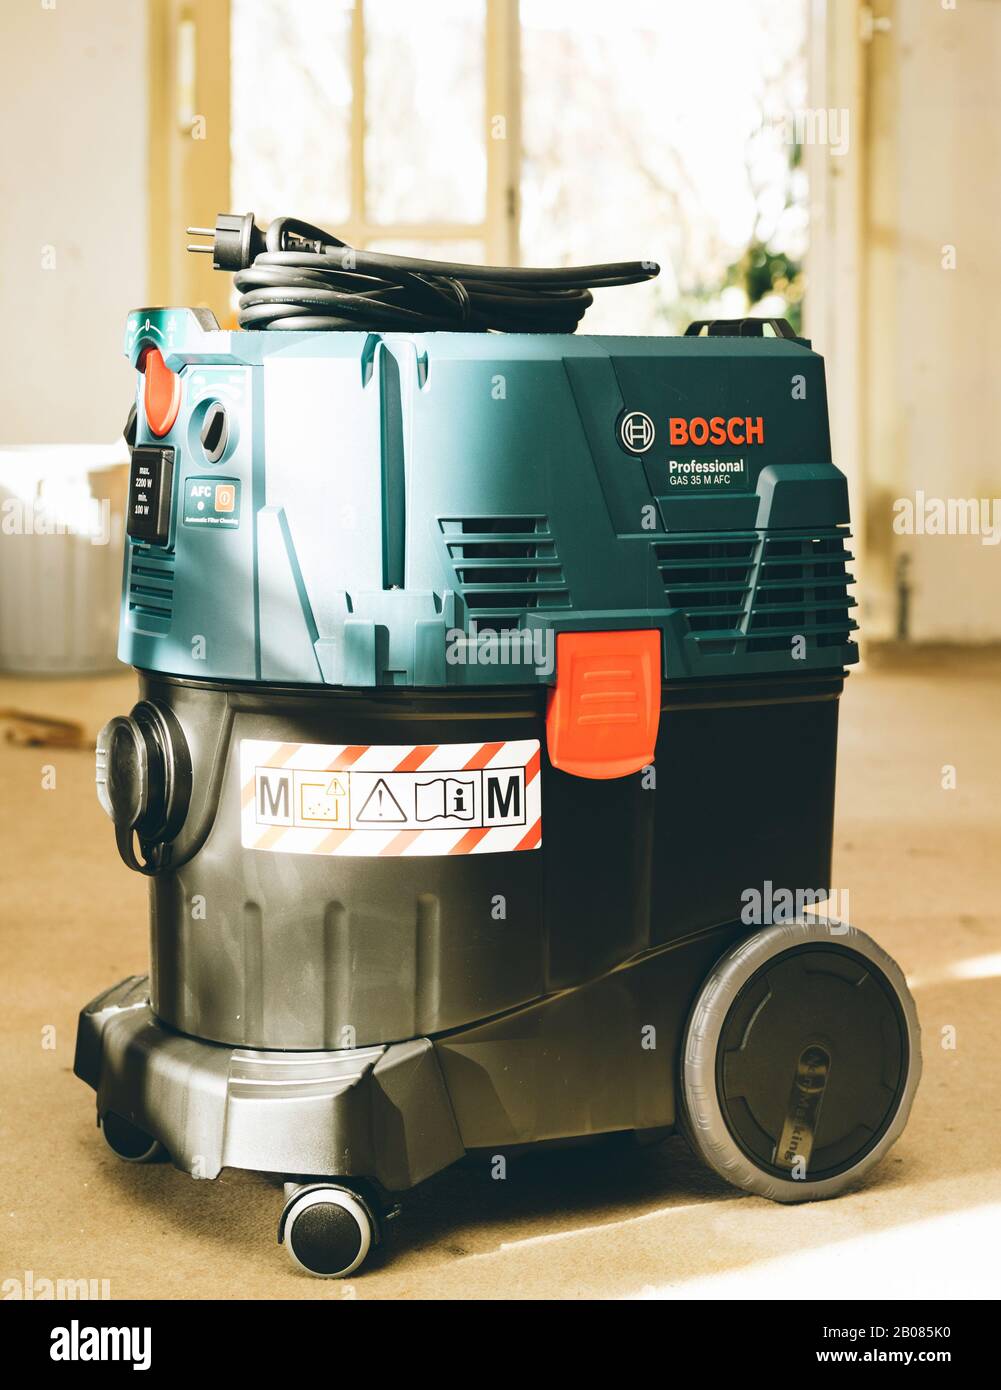 Strasbourg, France - Feb 9, 2020: Front view of Bosch Professional Gas 35 M  Class AFC with automatic filter cleaning system extractor on the  construction site concrete floor Stock Photo - Alamy